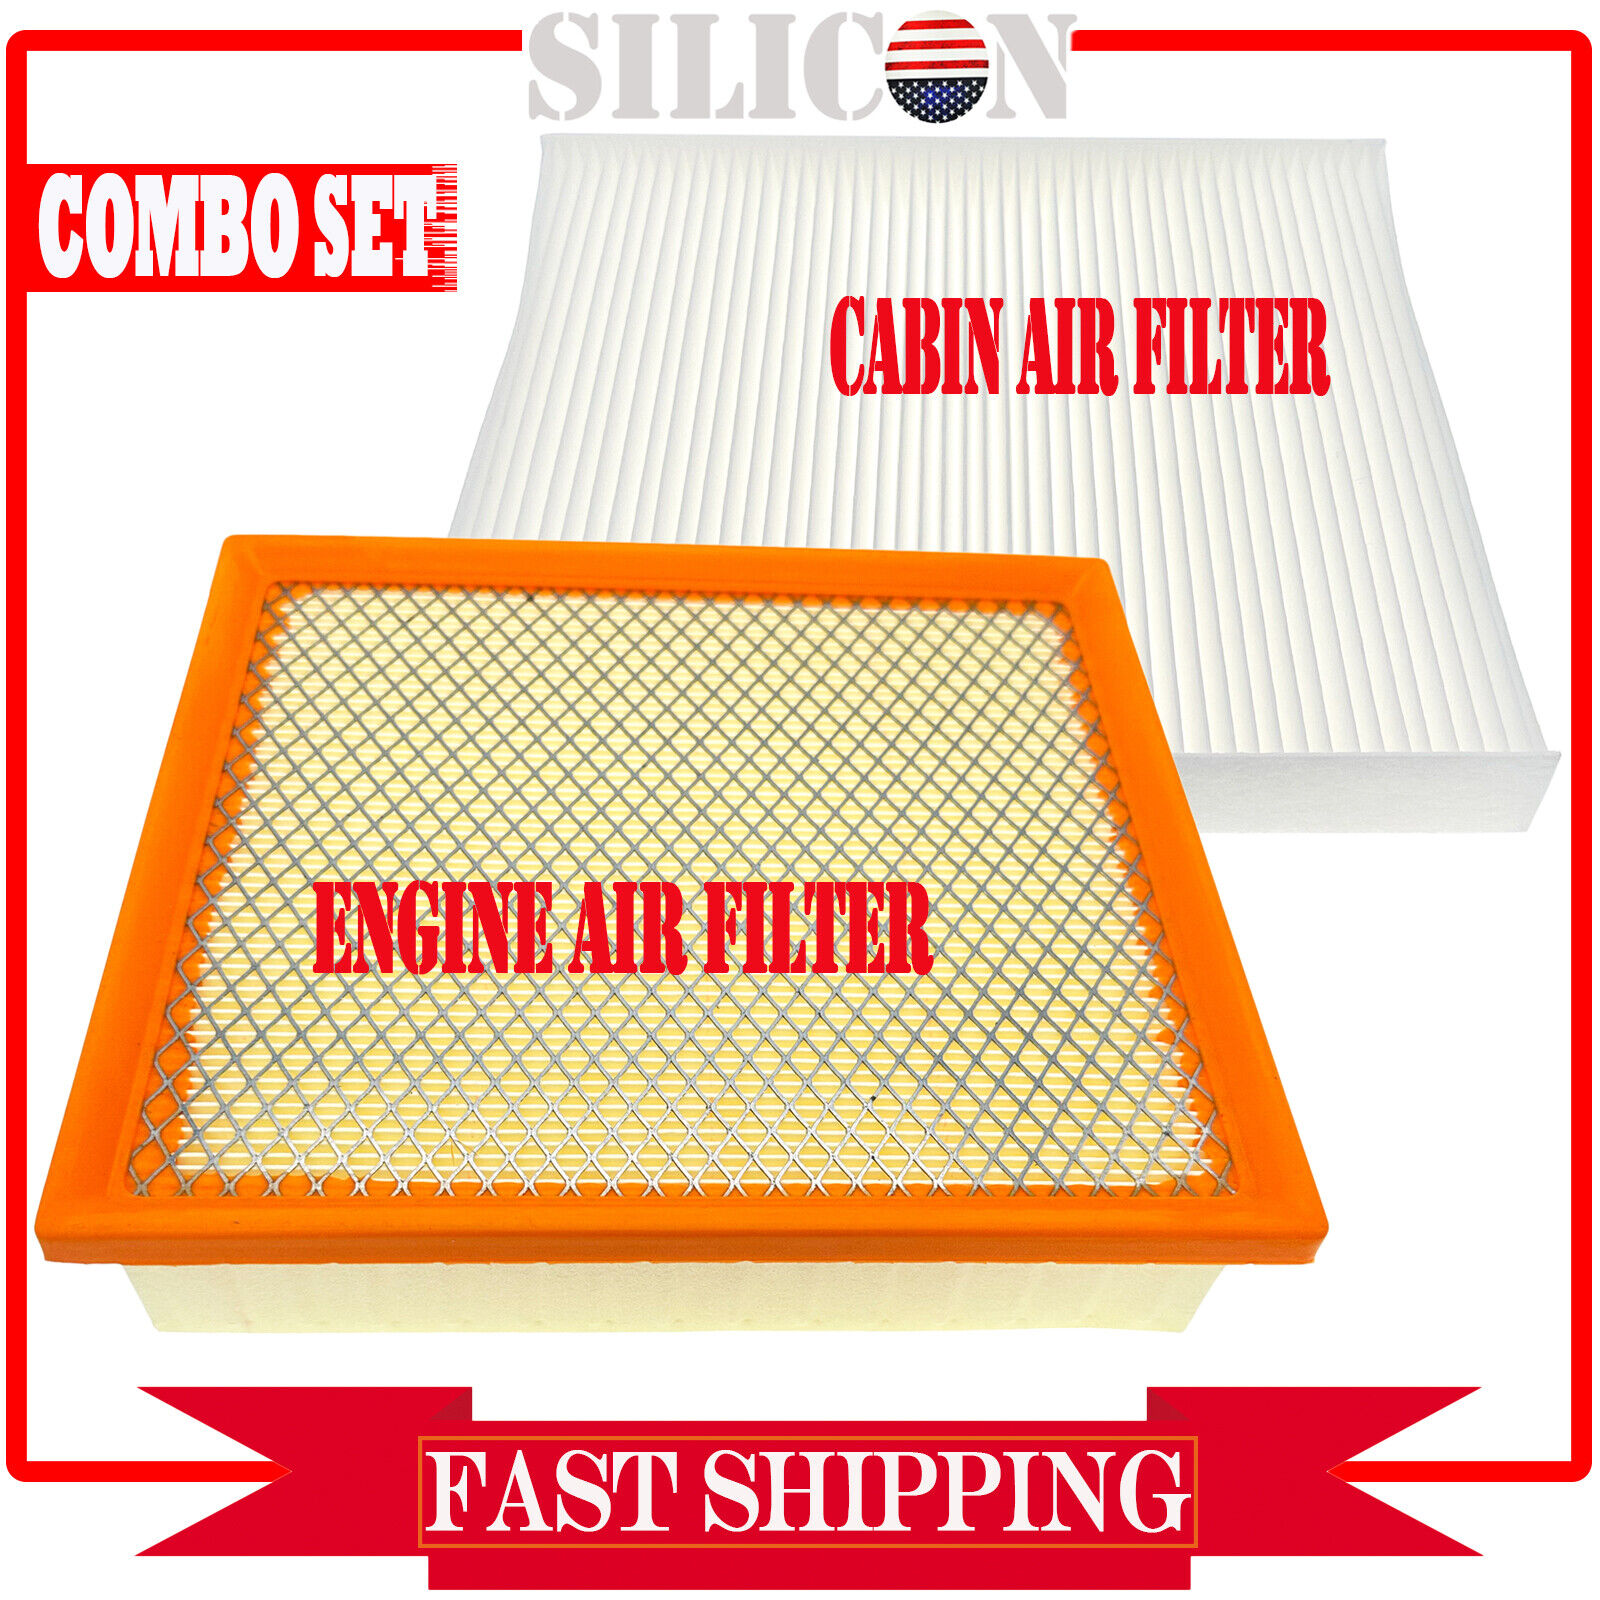 Engine & Cabin Air Filter For 2011-22 Dodge Durango 2011-21 Jeep Grand Cherokee